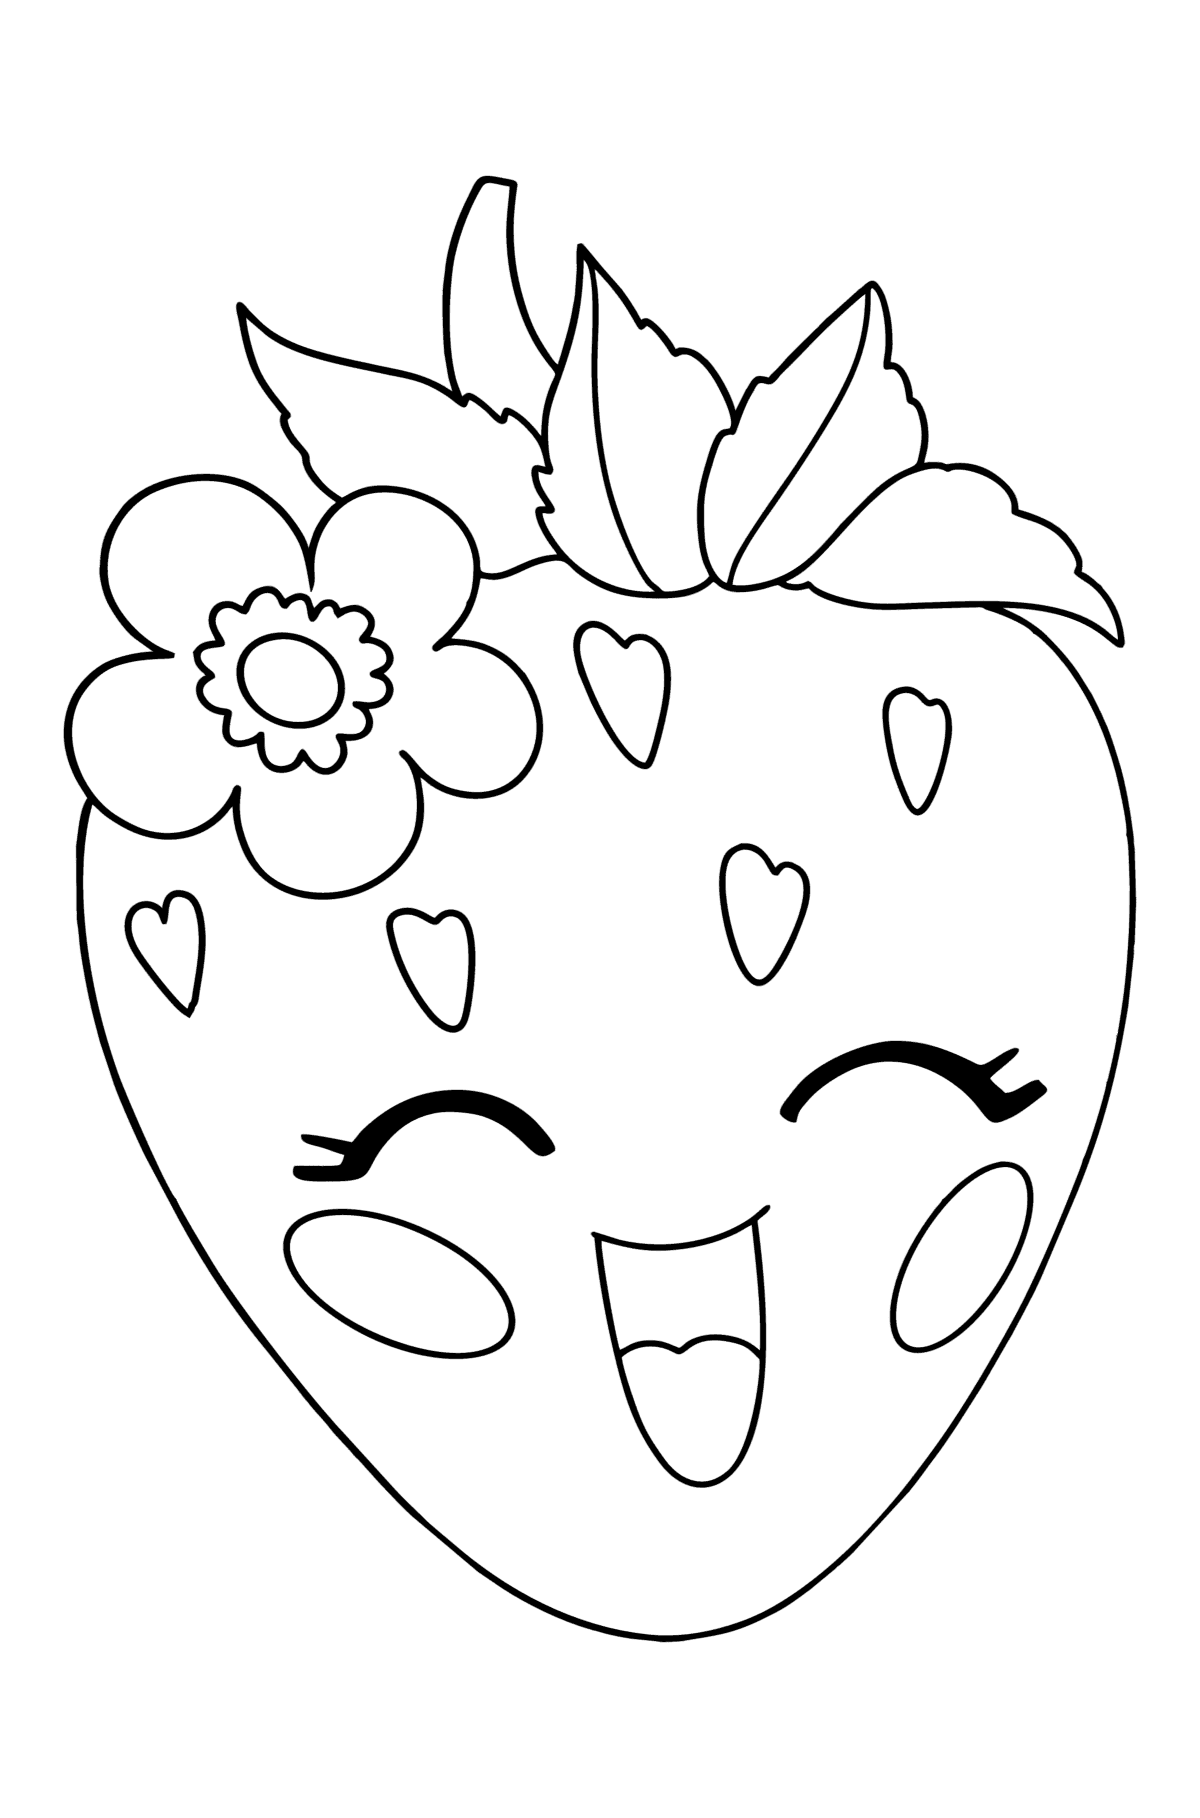 Merry strawberry сoloring page - Coloring Pages for Kids